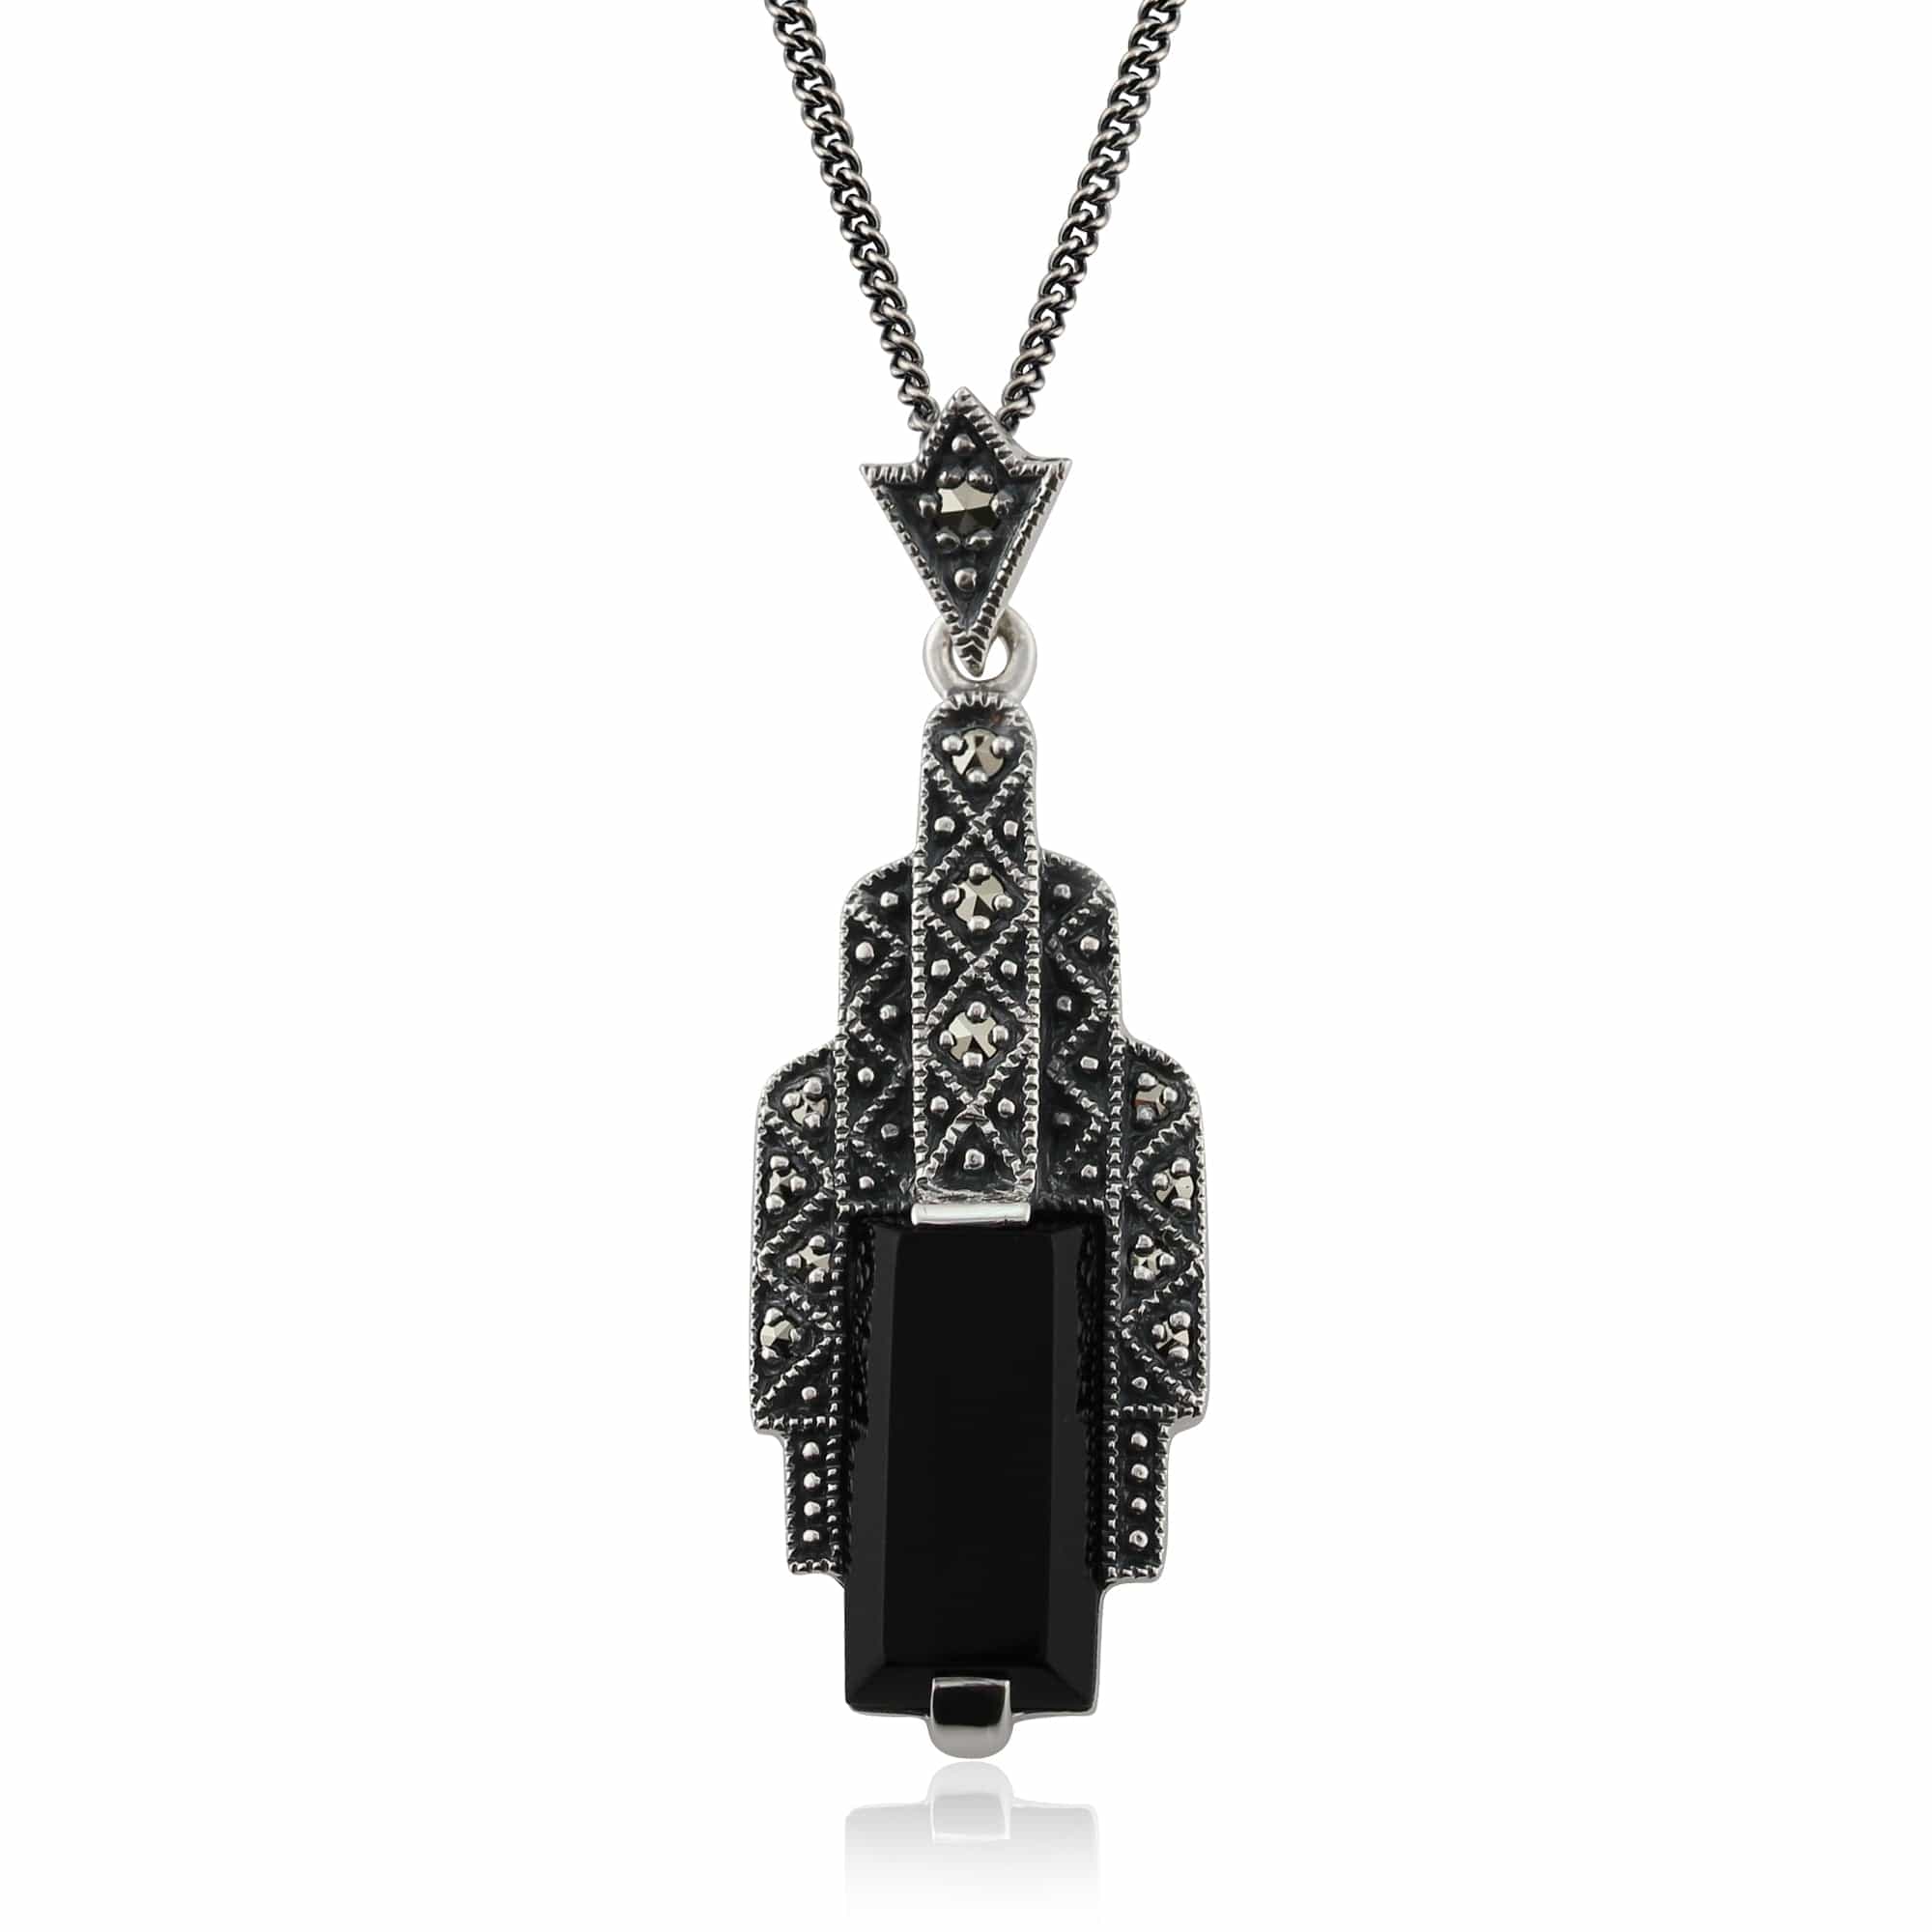 Art Deco Style Rectangle Black Onyx Cabochon & Marcasite Necklace In Sterling Silver - Gemondo